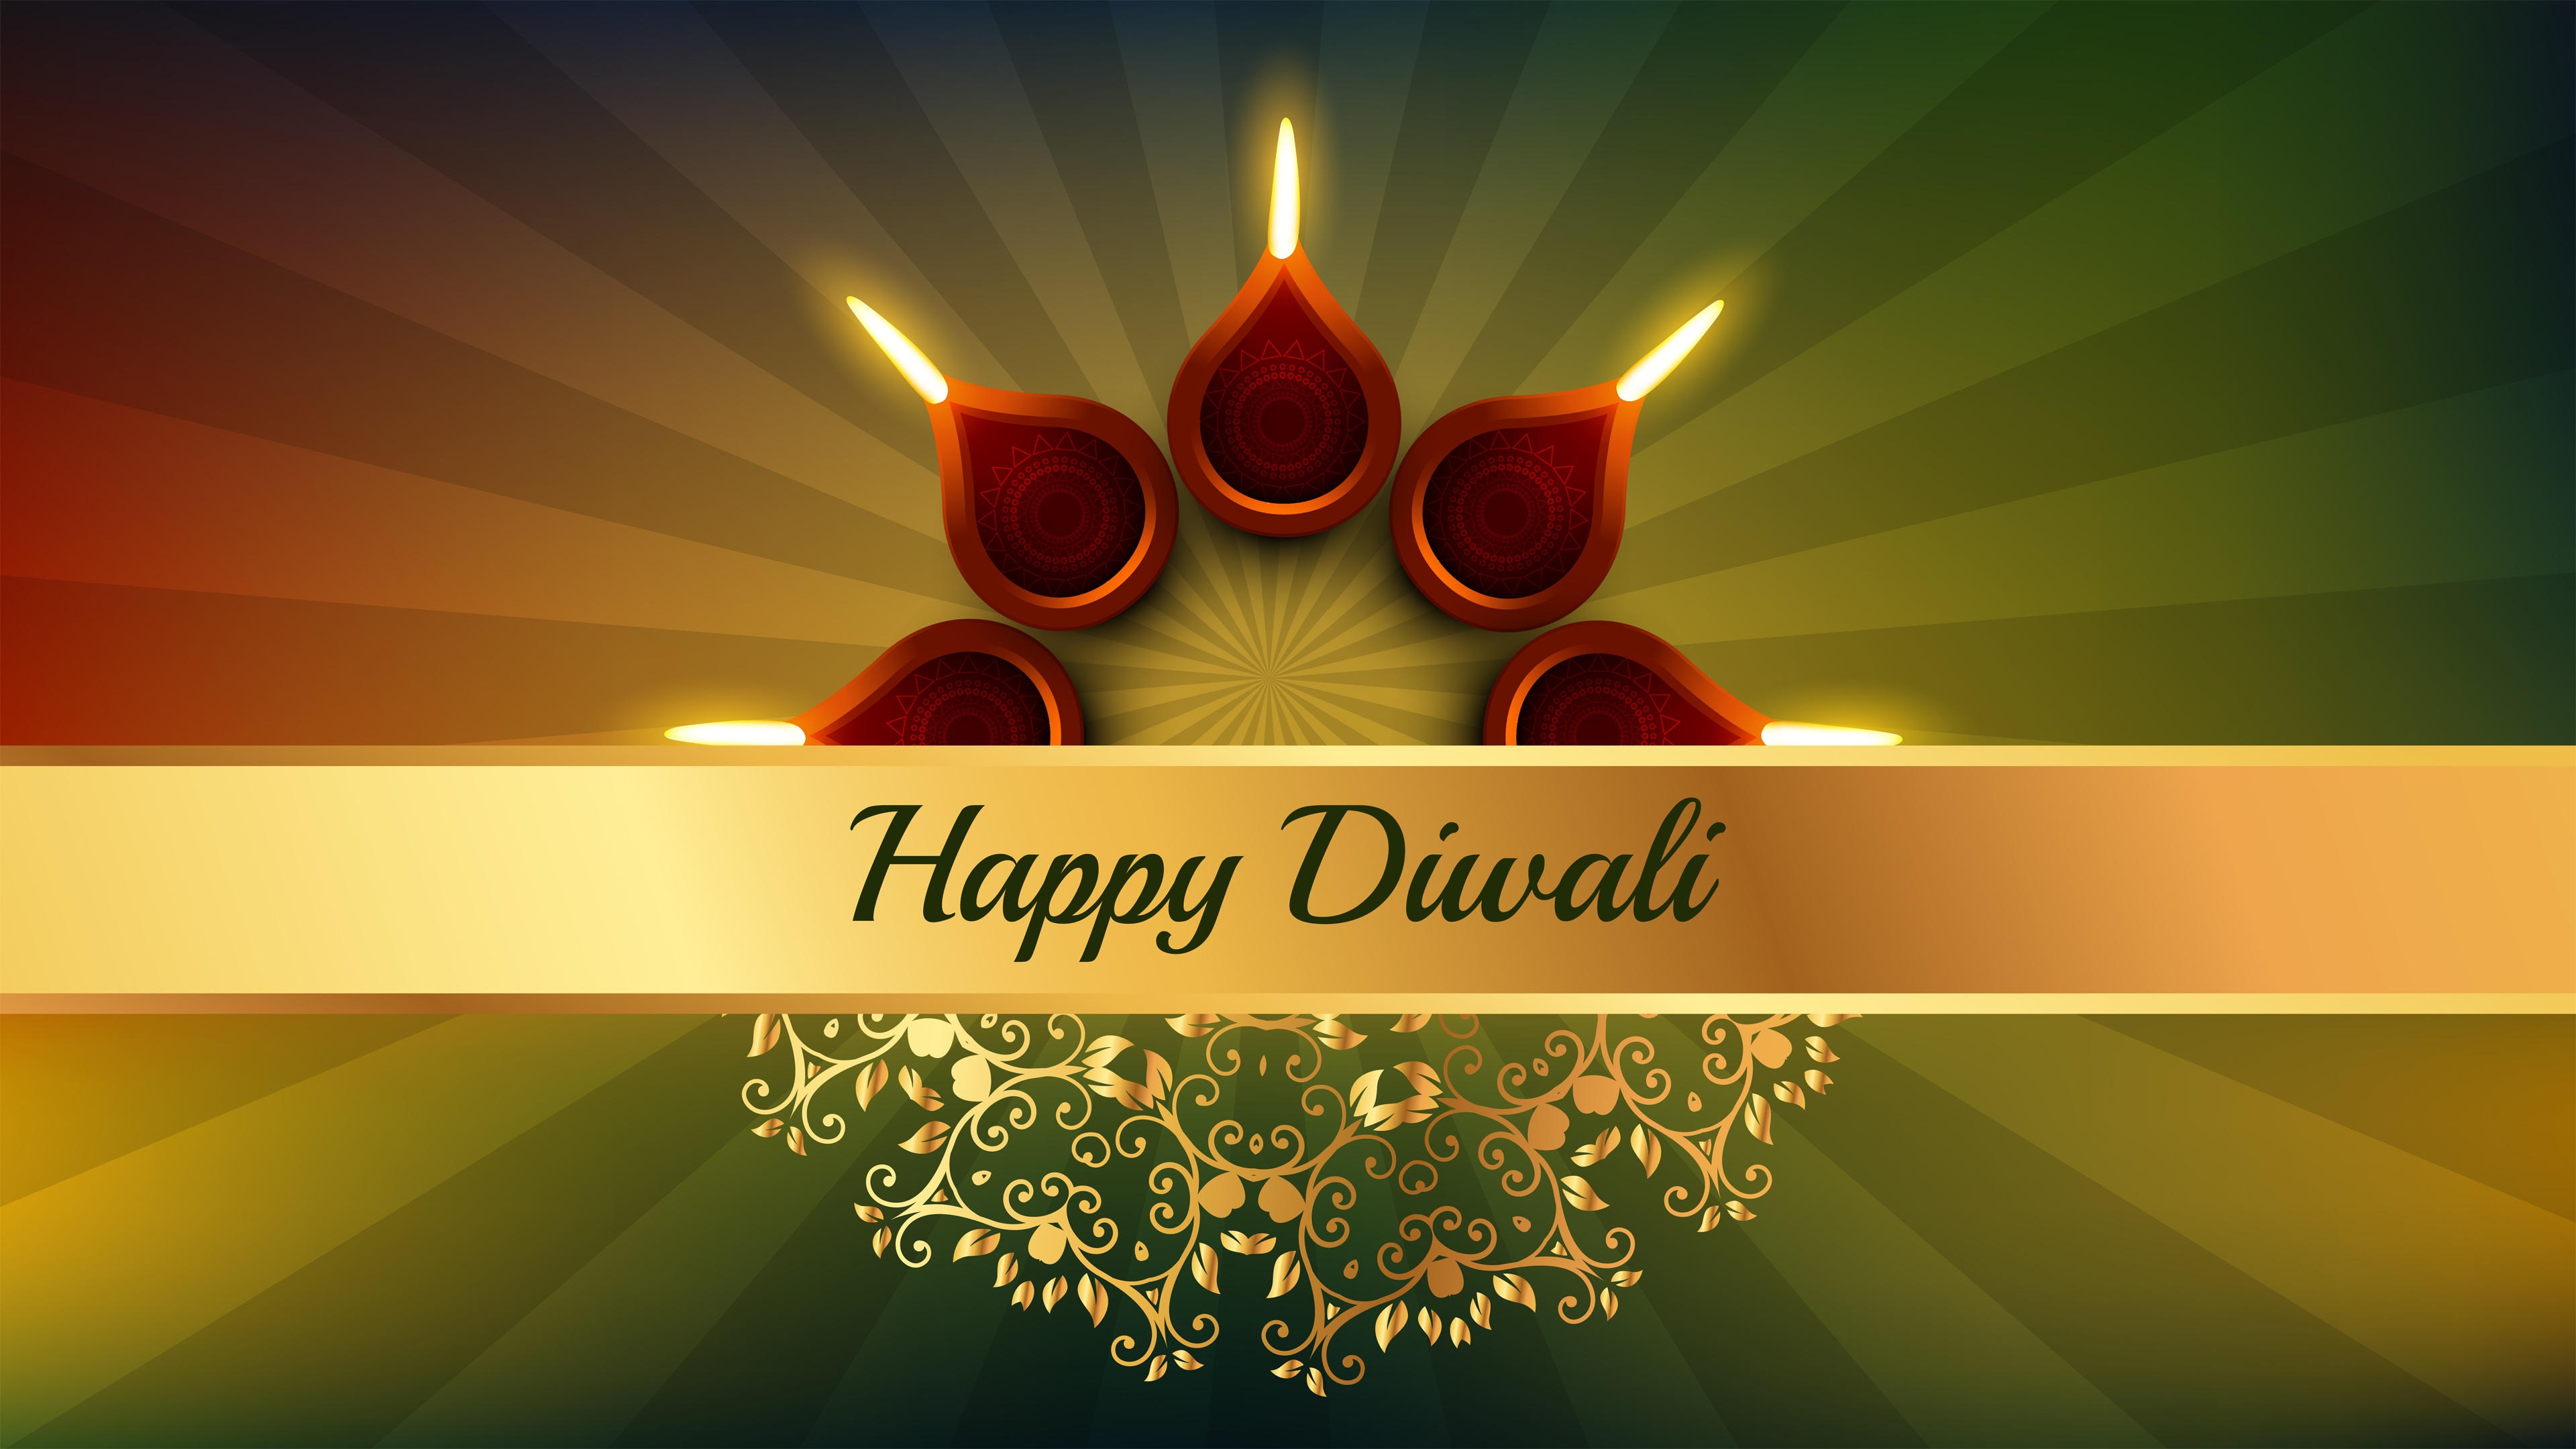 Diwali k wallpapers for your desktop or mobile screen free and easy to download